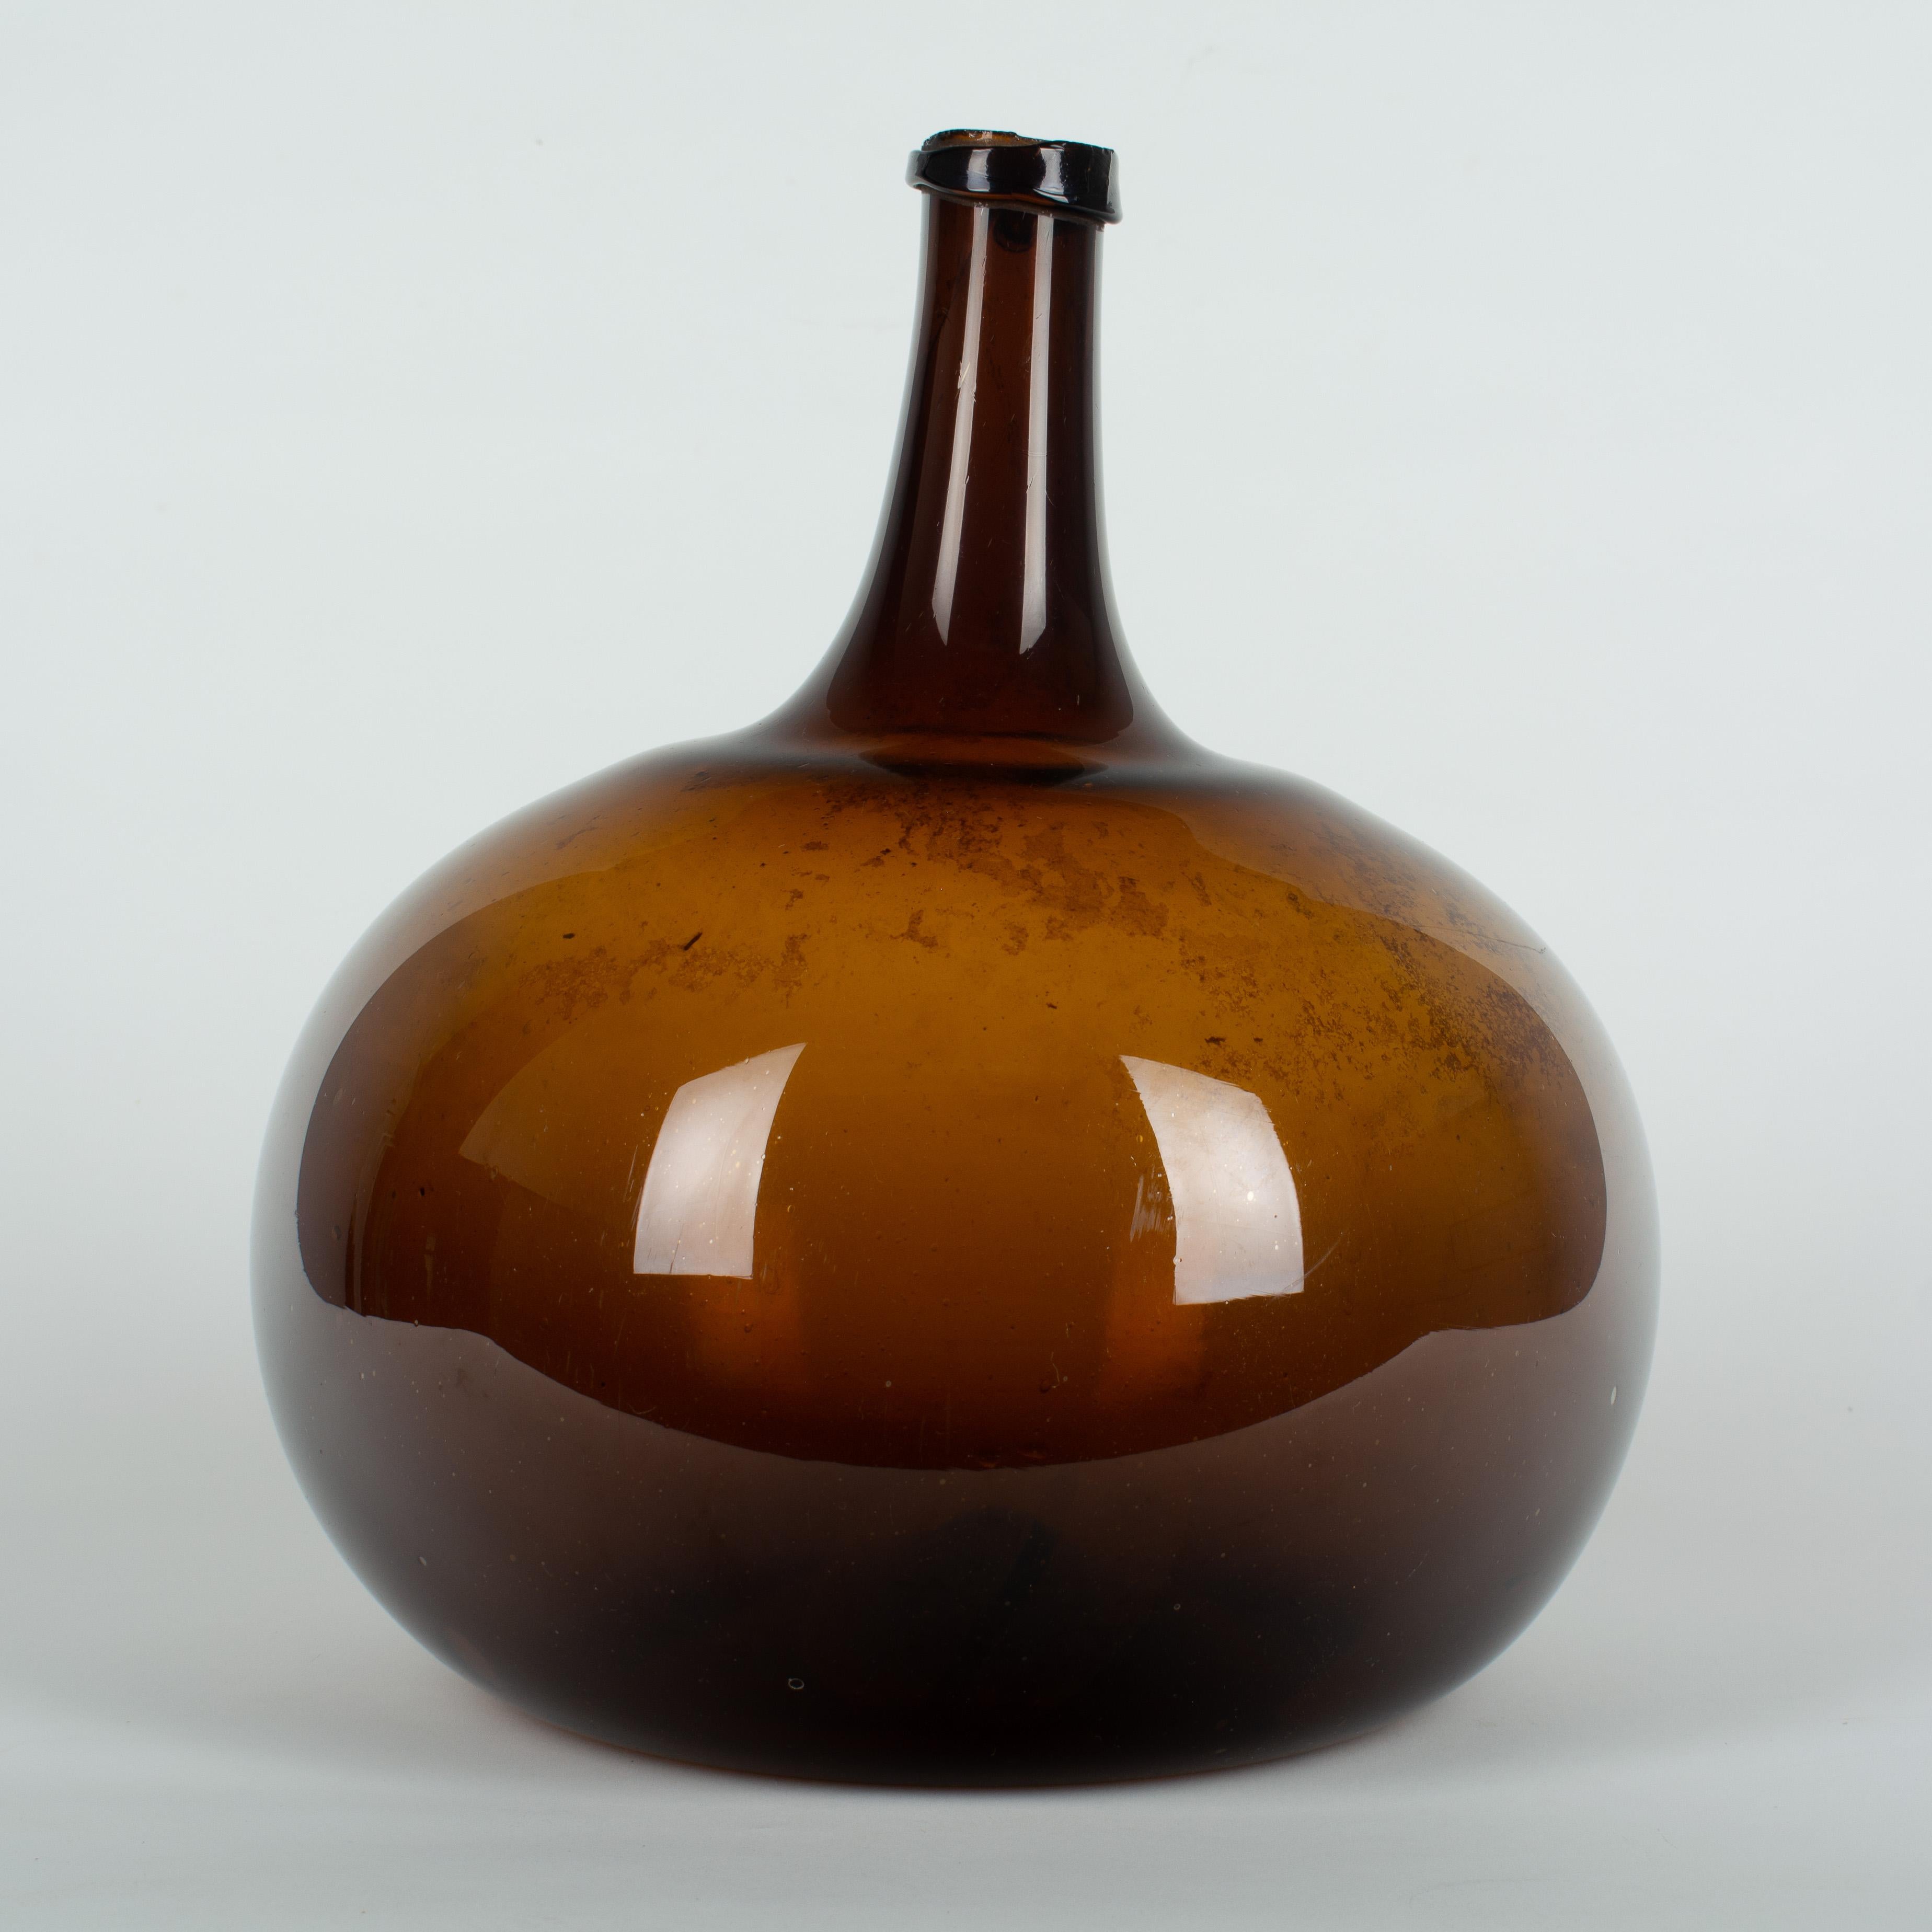 Hand-Crafted 19th Century French Blown Glass Demijohn Bottle